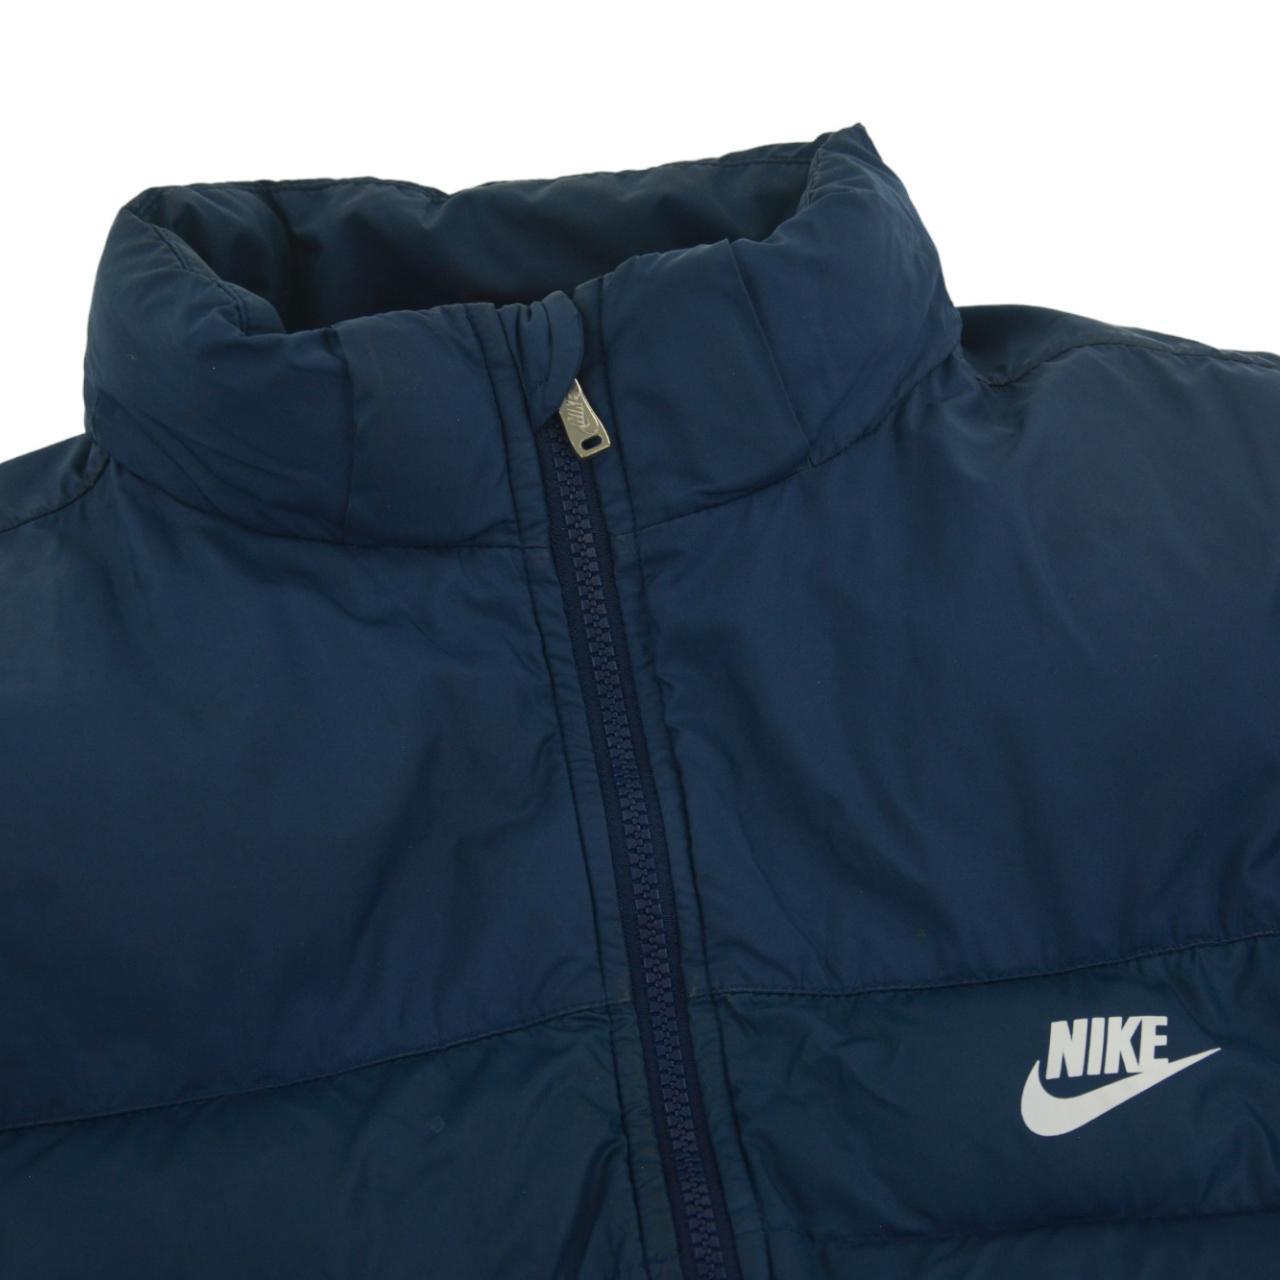 Vintage Nike Puffer Jacket Size XS - Known Source